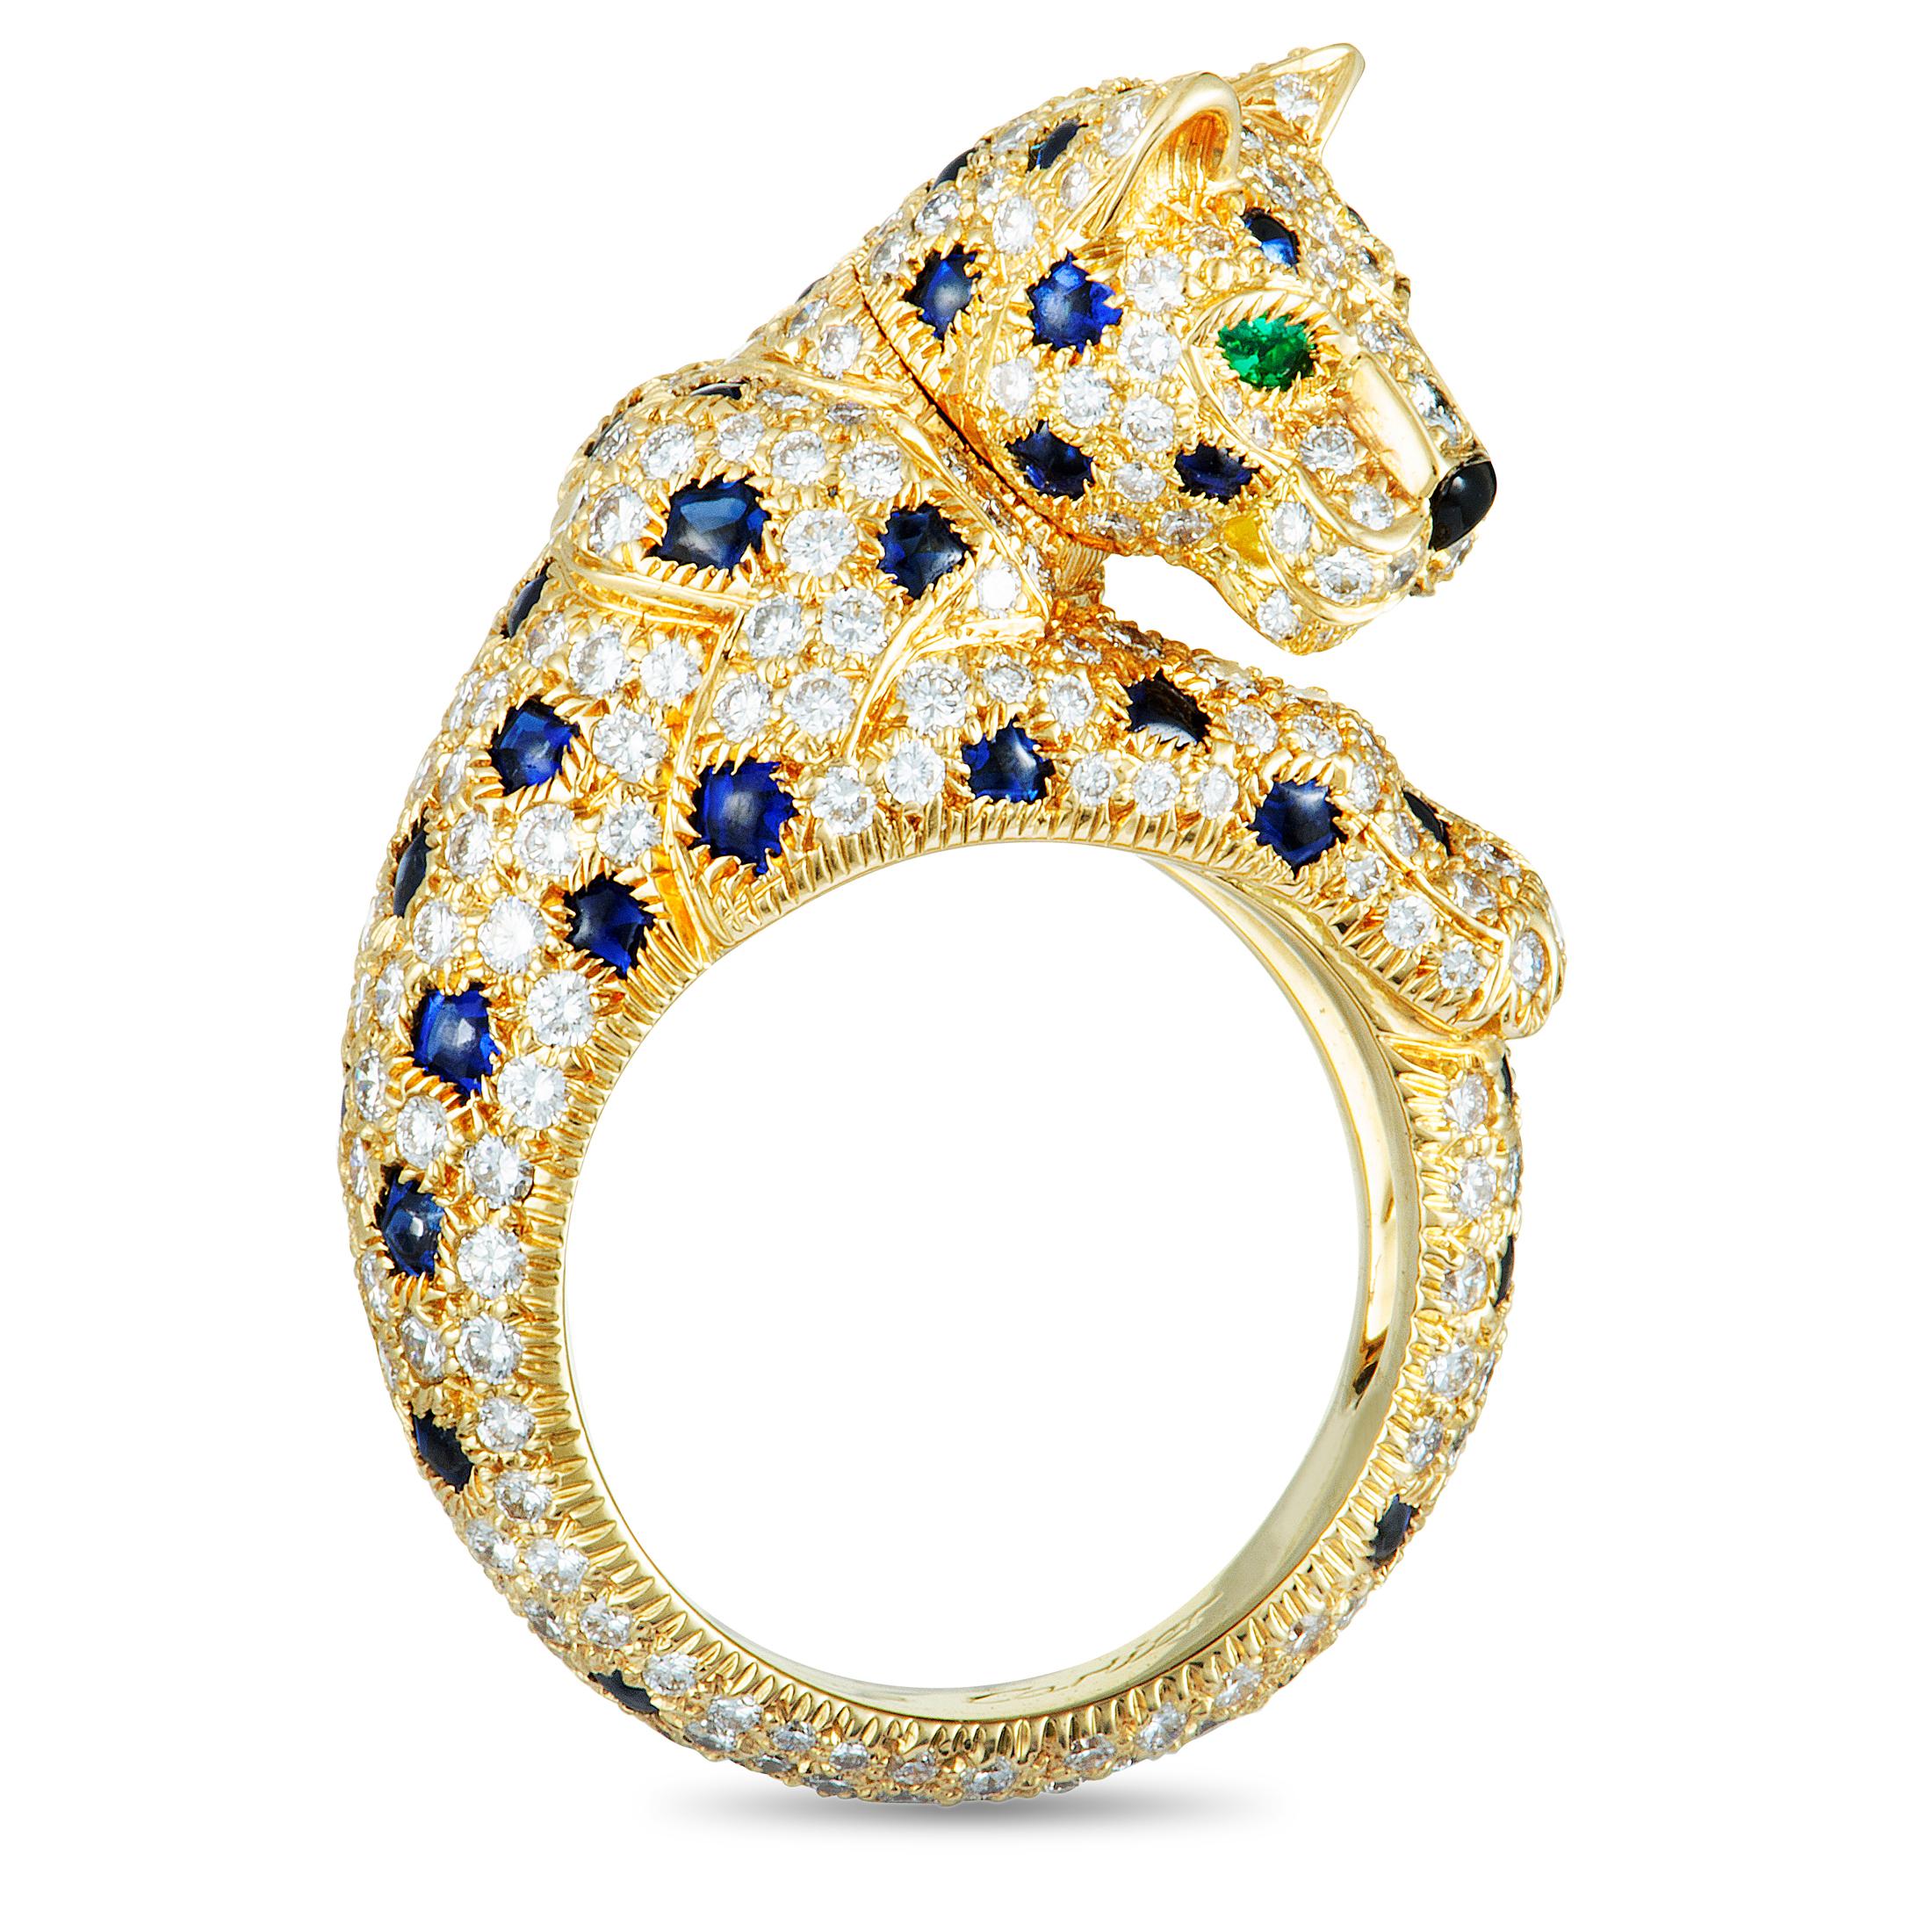 This stunning rare piece from Cartier’s iconic “Panthère” collection is masterfully crafted from luxurious 18K yellow gold whose enticing radiance is accentuated by a plethora of attractive gems. The ring is embellished with diamonds, sapphires,